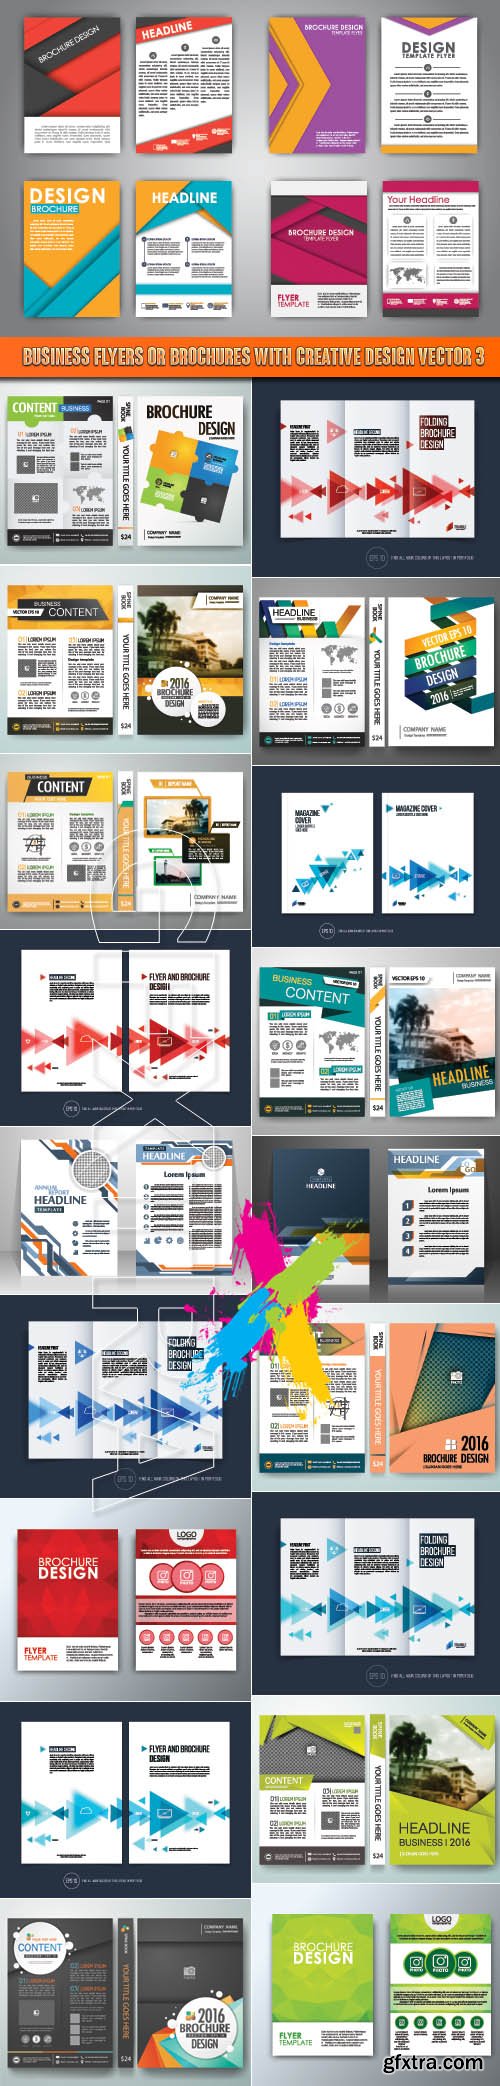 Business flyers or brochures with creative design vector 3